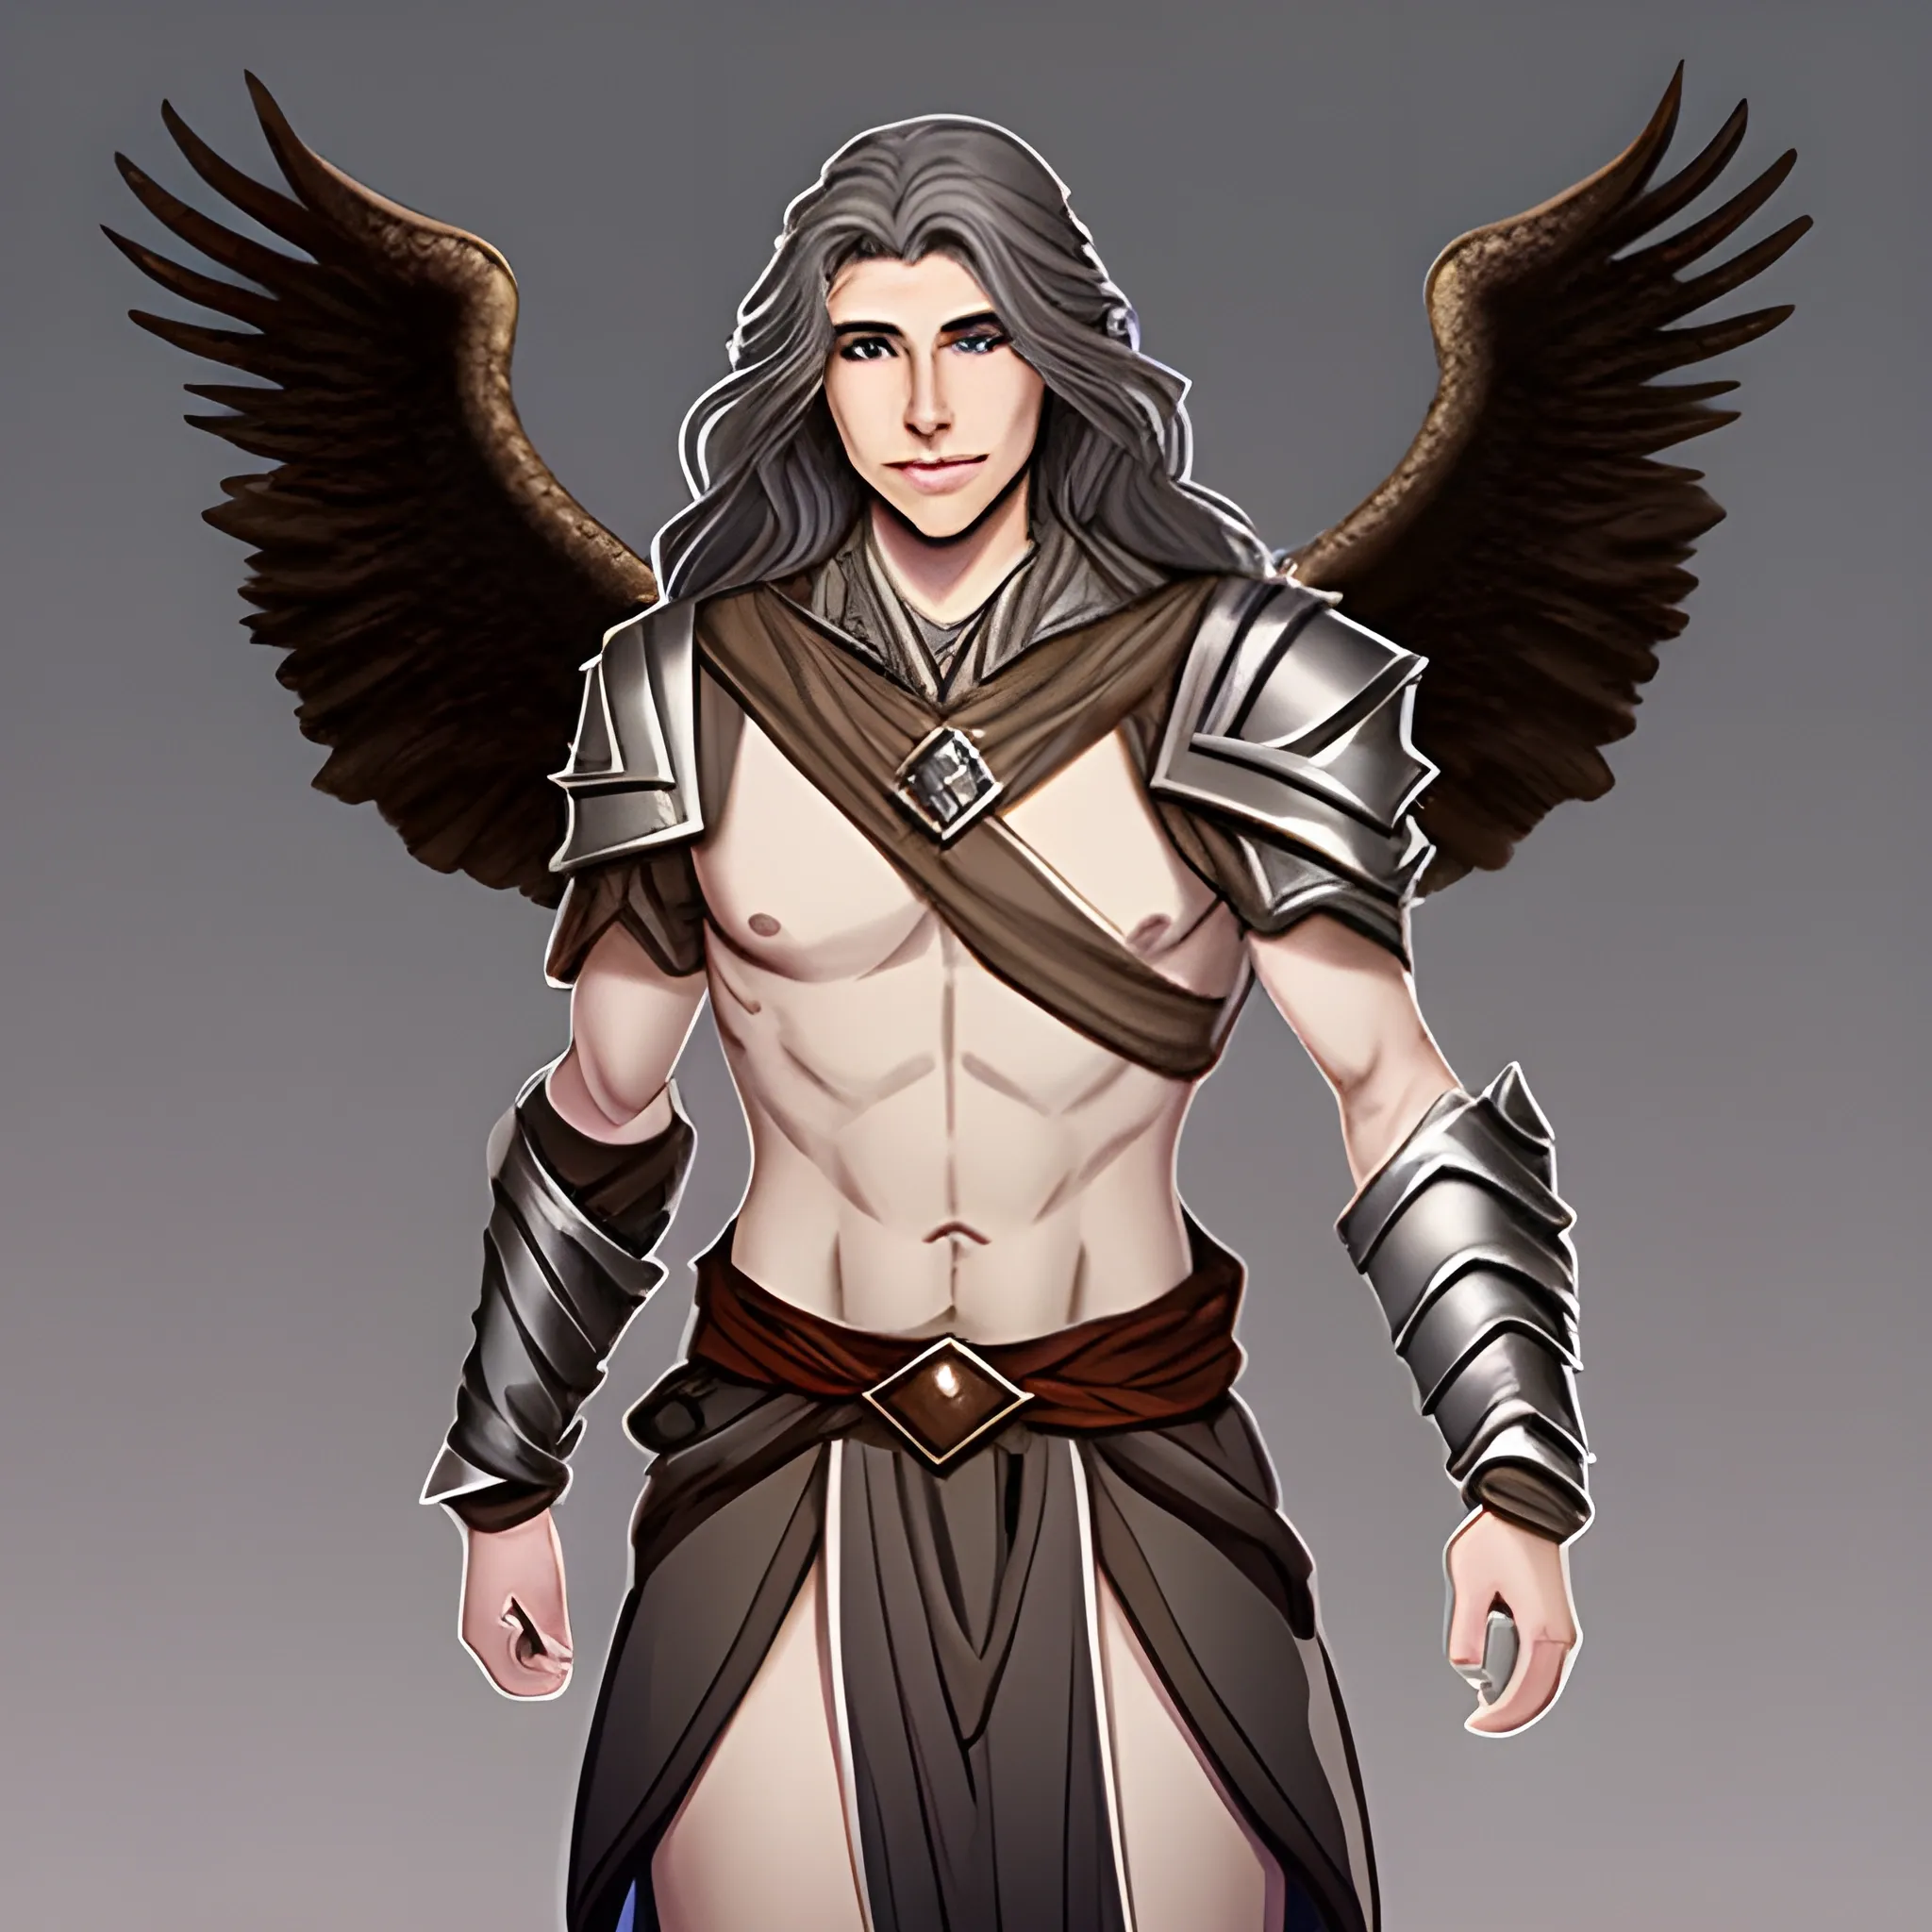 male aasimar from dungeons & dragons with: brown, semi-wavy and semi-long hair; very light gray and slightly shiny skin;